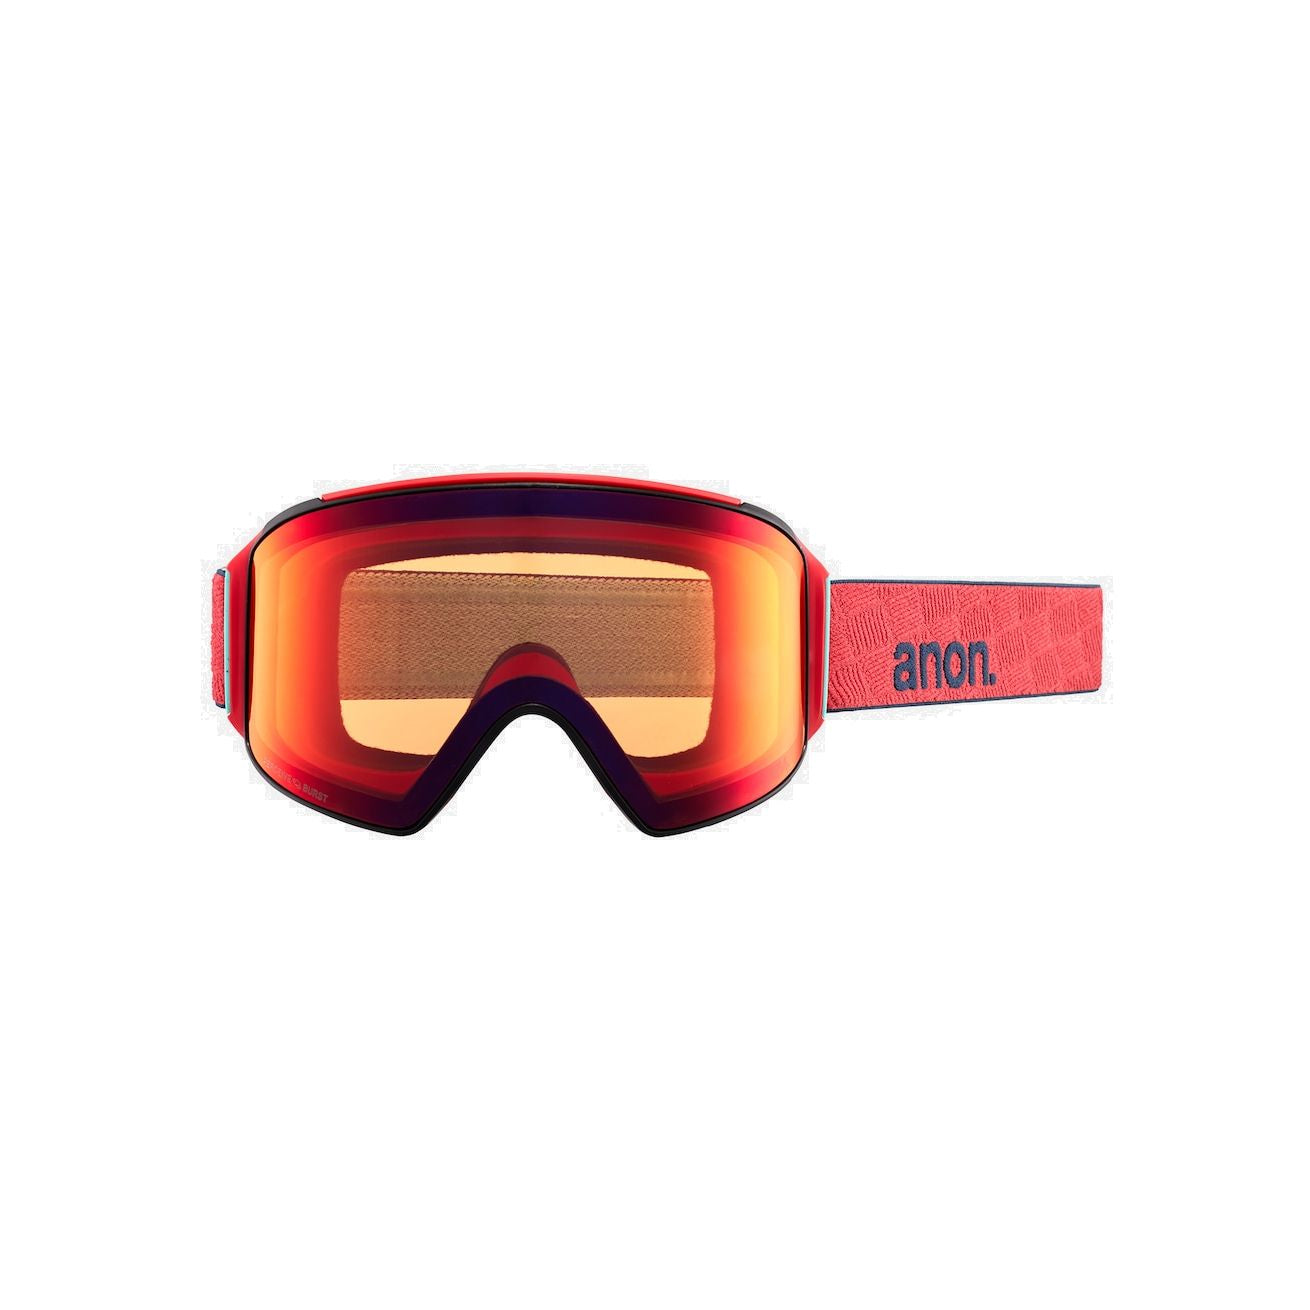 Anon M4 Cylindrical Goggles + Bonus Lens + MFI Face Mask - Low Bridge Fit Coral / Perceive Sunny Bronze Snow Goggles